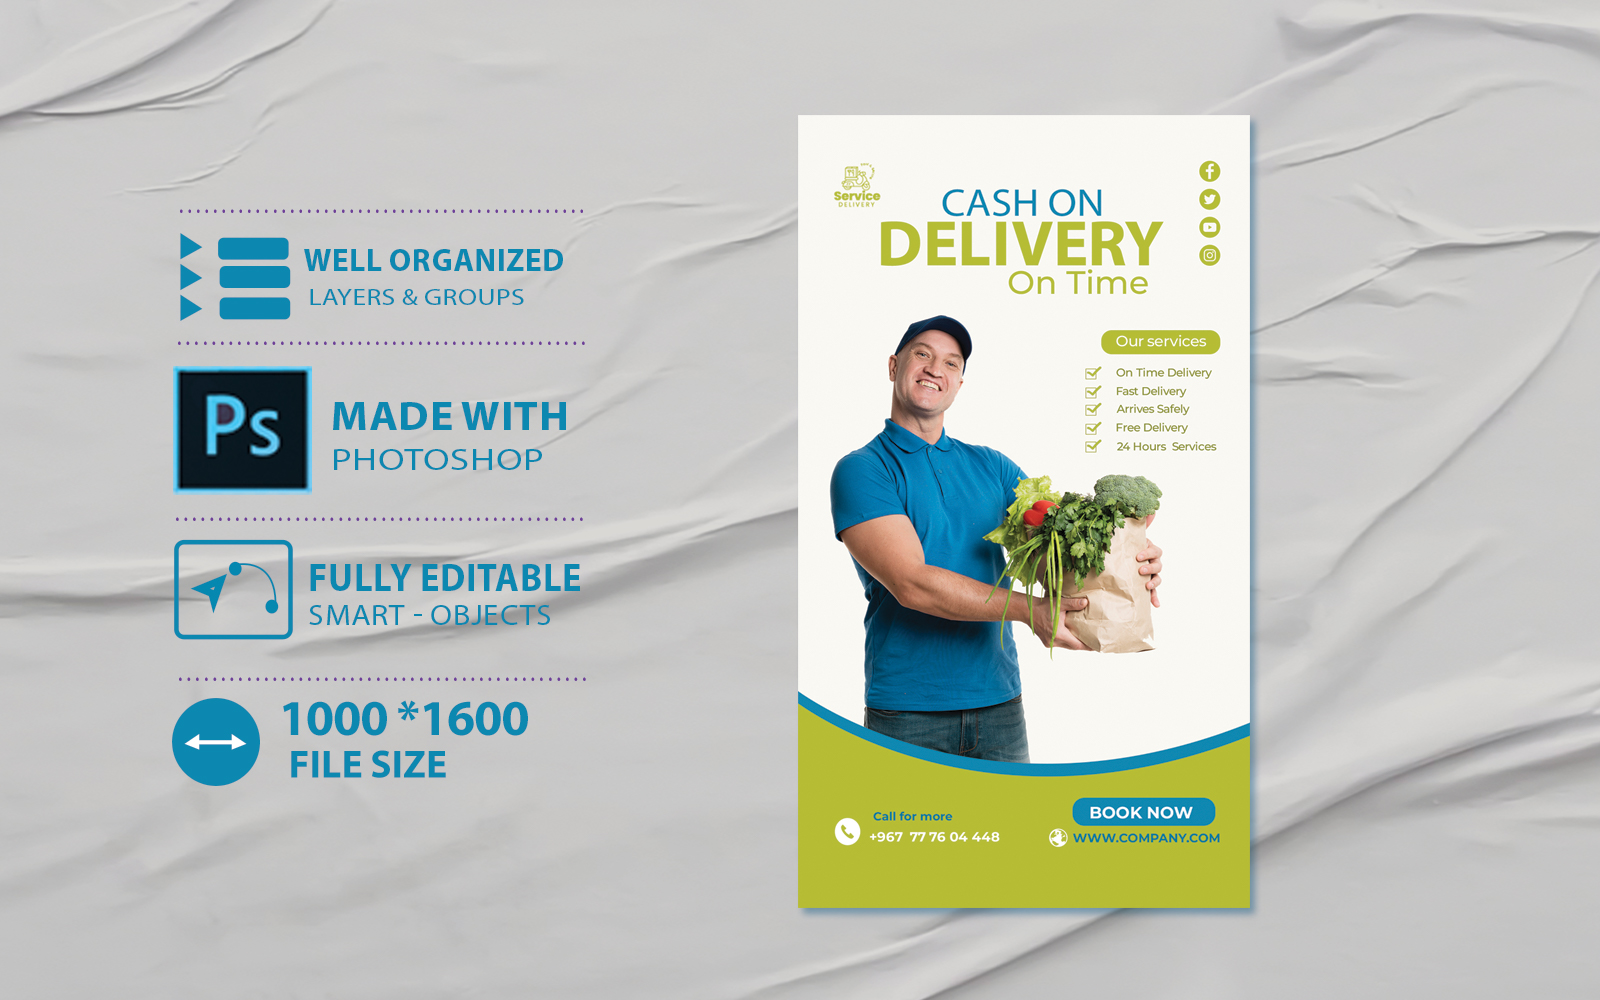 Delivery Service Company Identity Design - Other DL